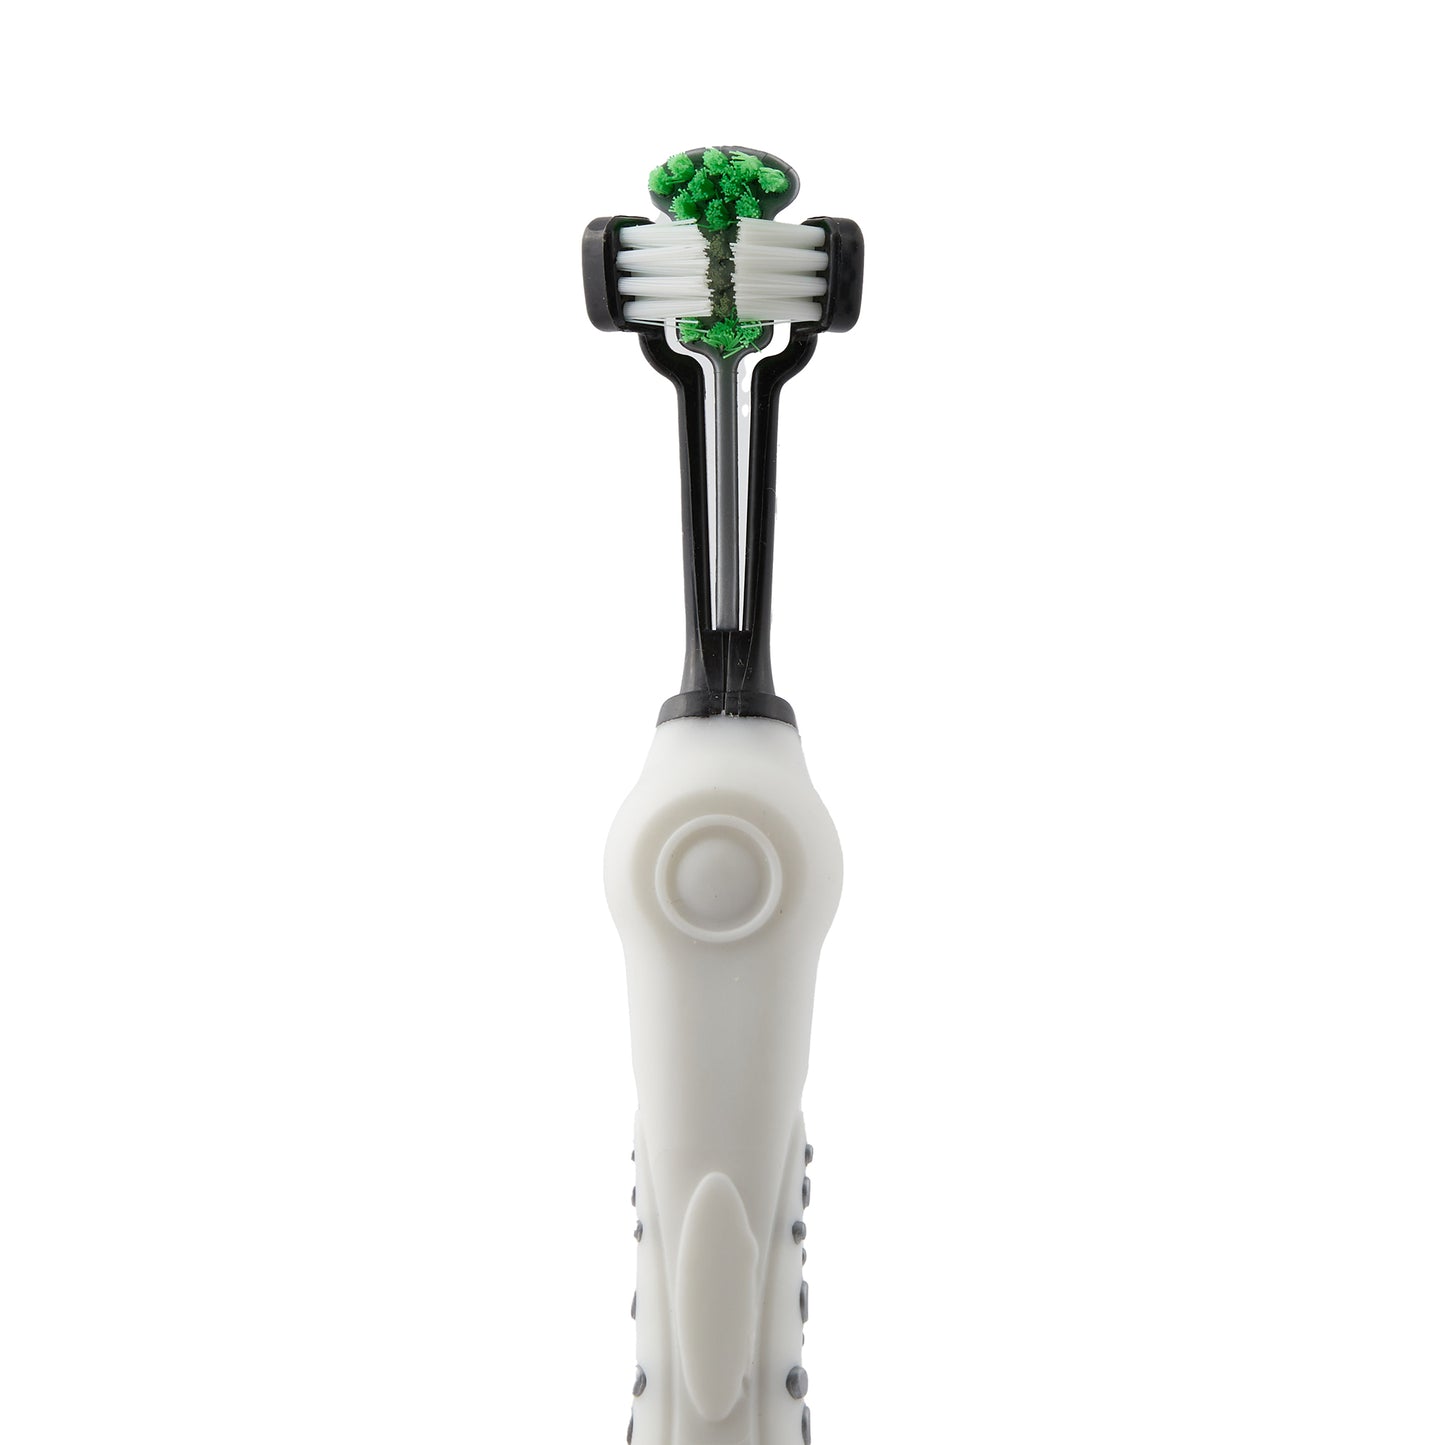 Pet Toothbrush | Maintain Dental Health for Your Beloved Companion